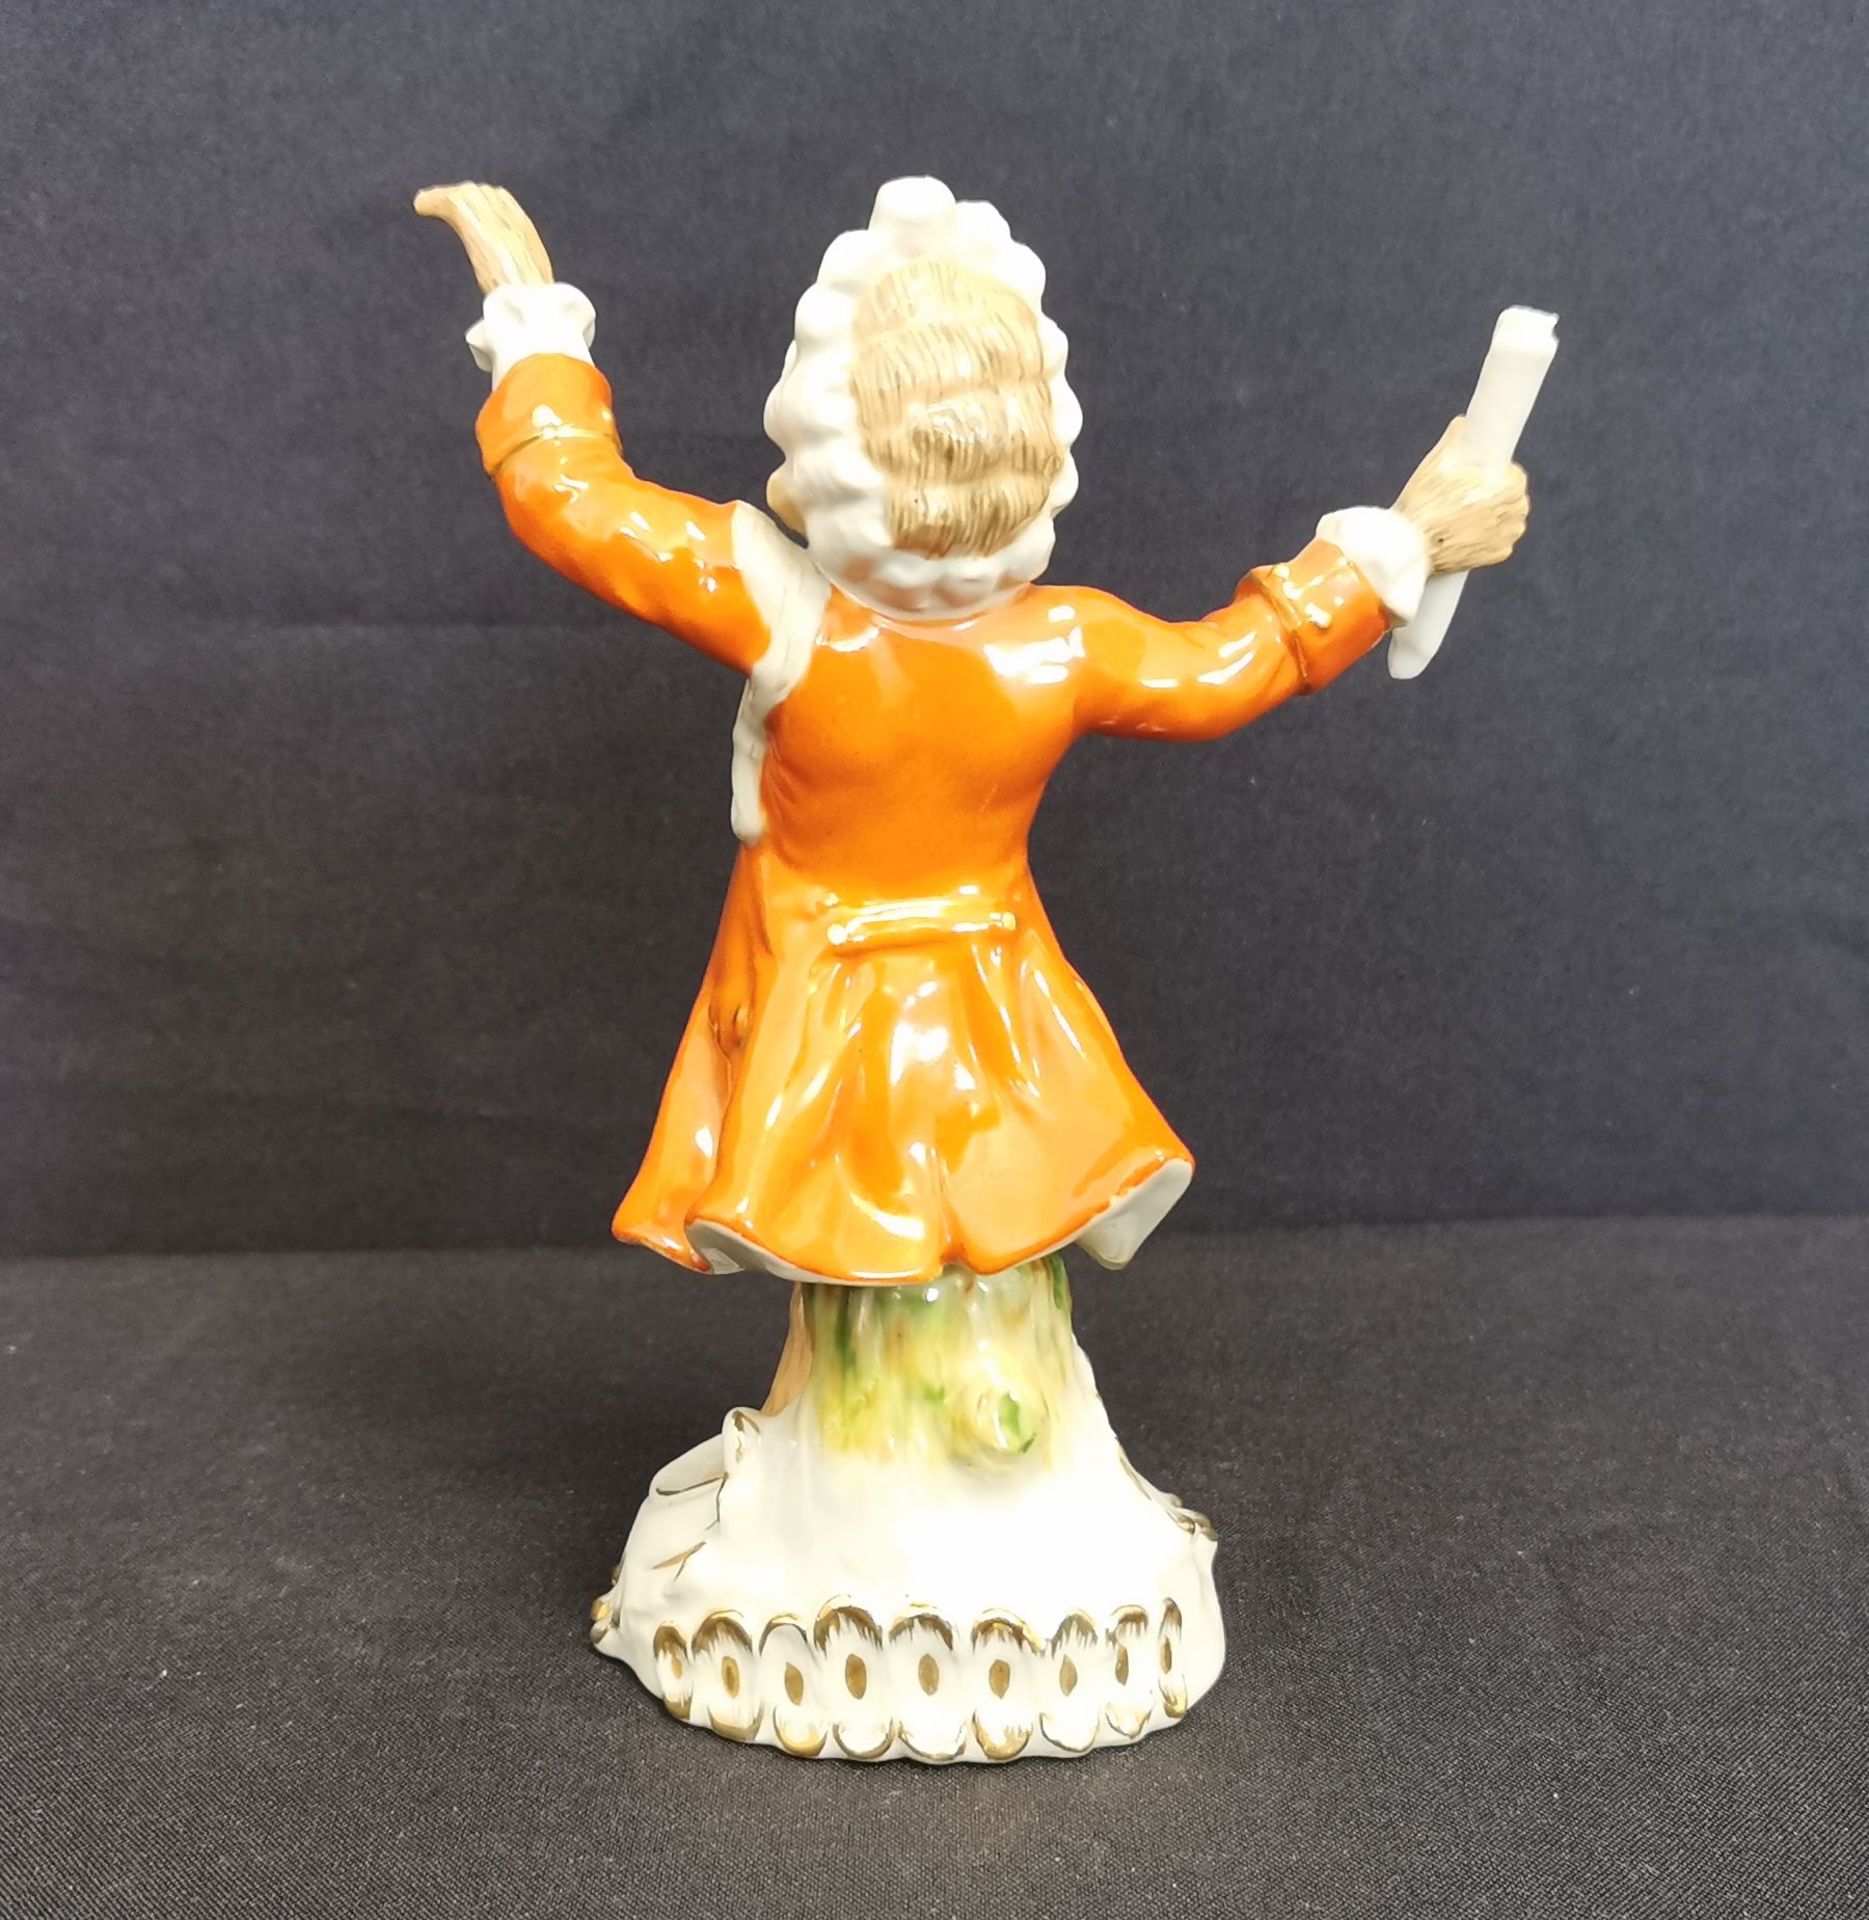 PORCELAIN FIGURINE - CONDUCTOR - Image 3 of 5